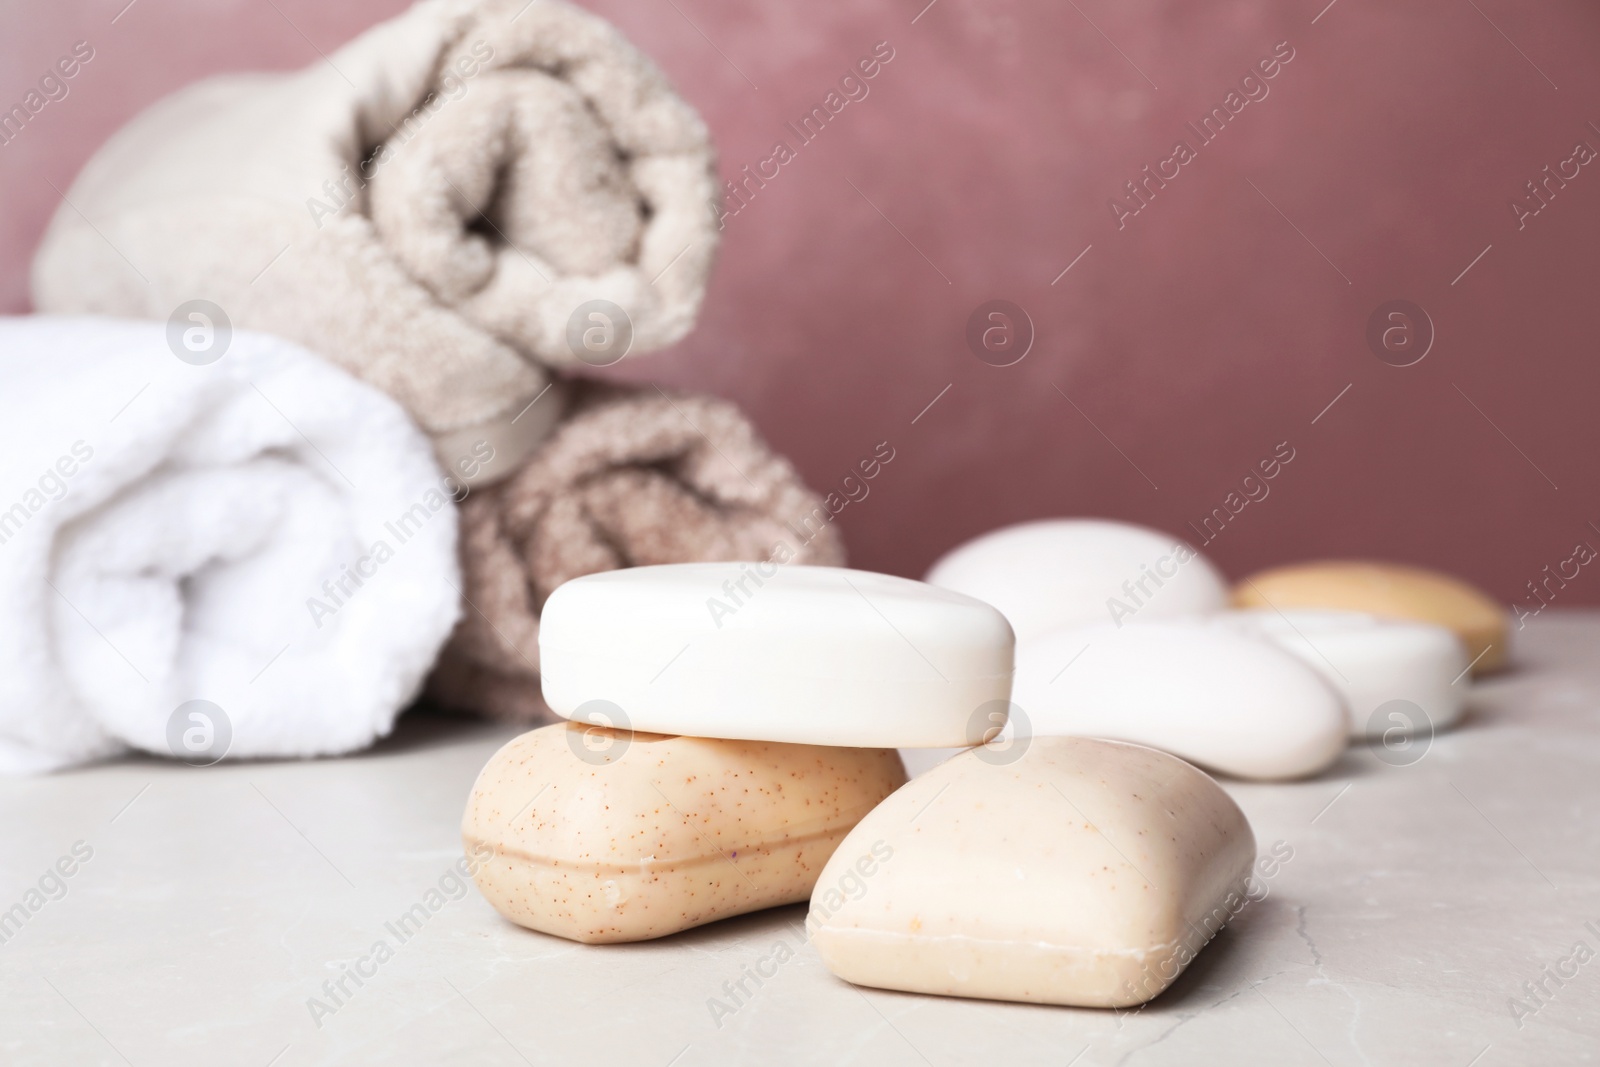 Photo of Different soap bars on light table against color background